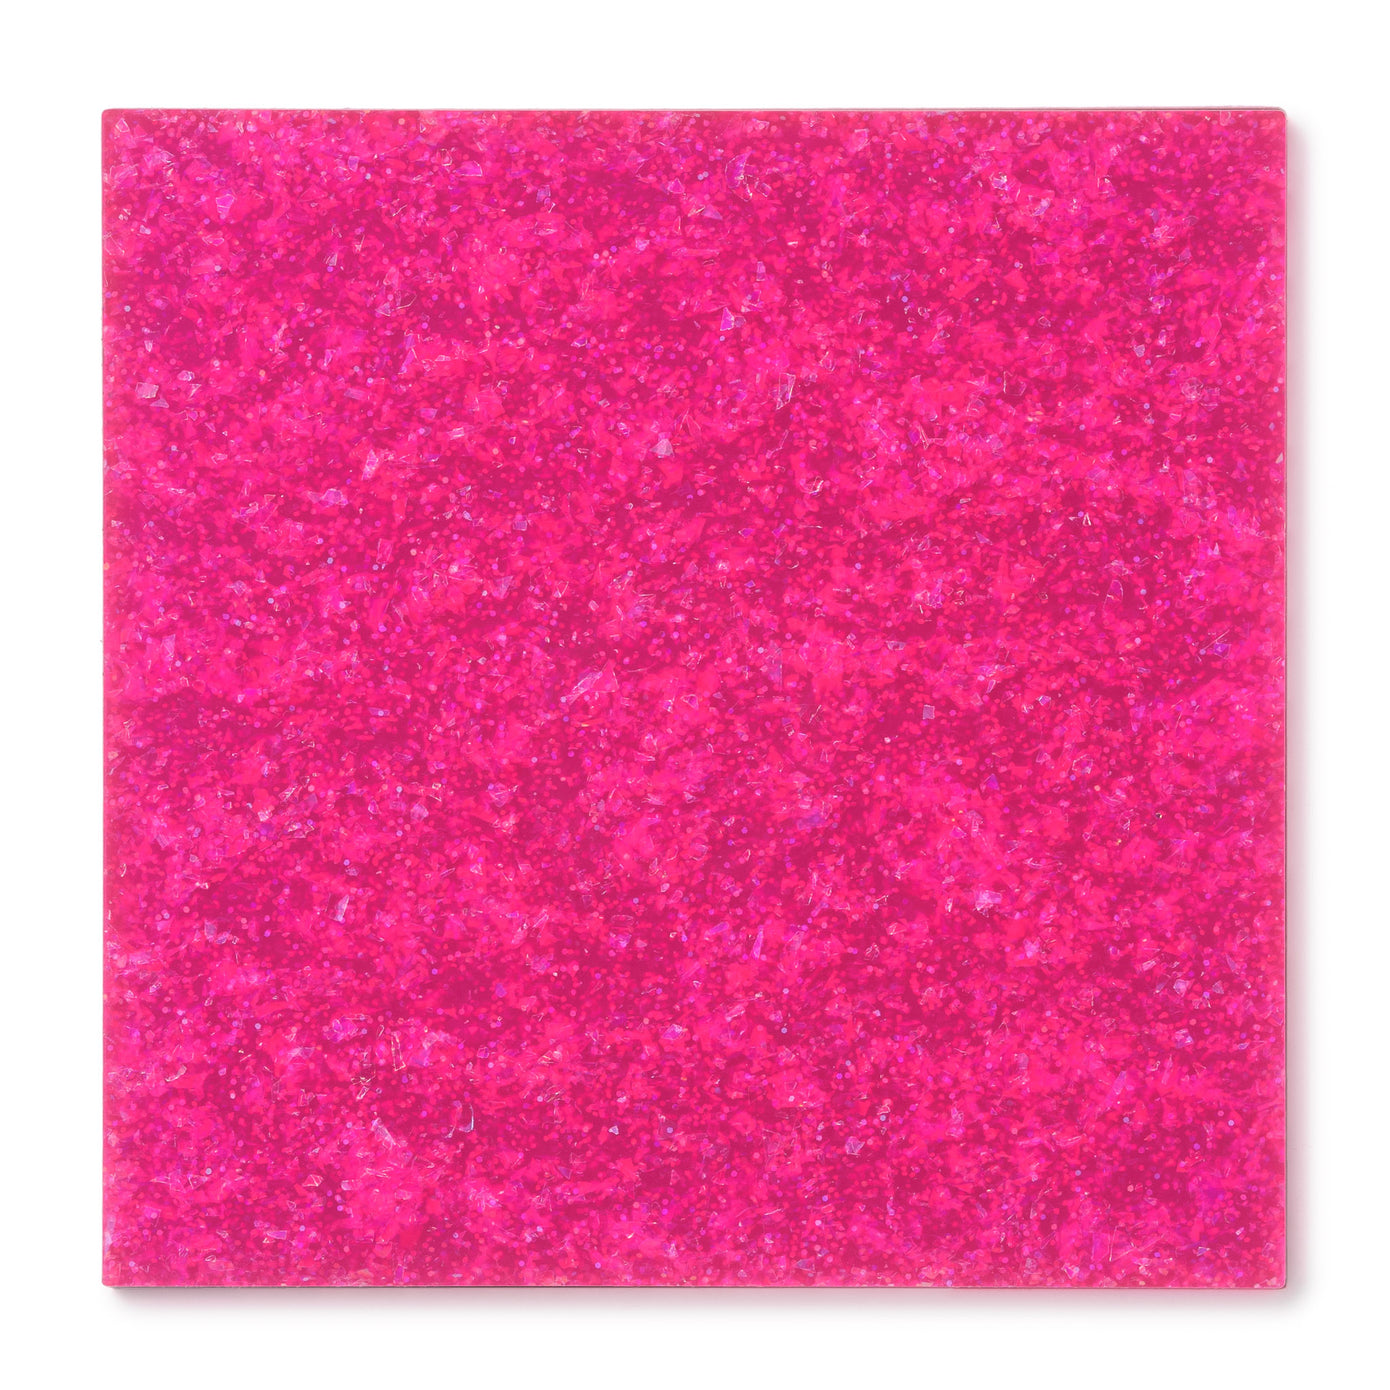 Neon Pink - Adhesive Vinyl Sheets - Create by Firefly